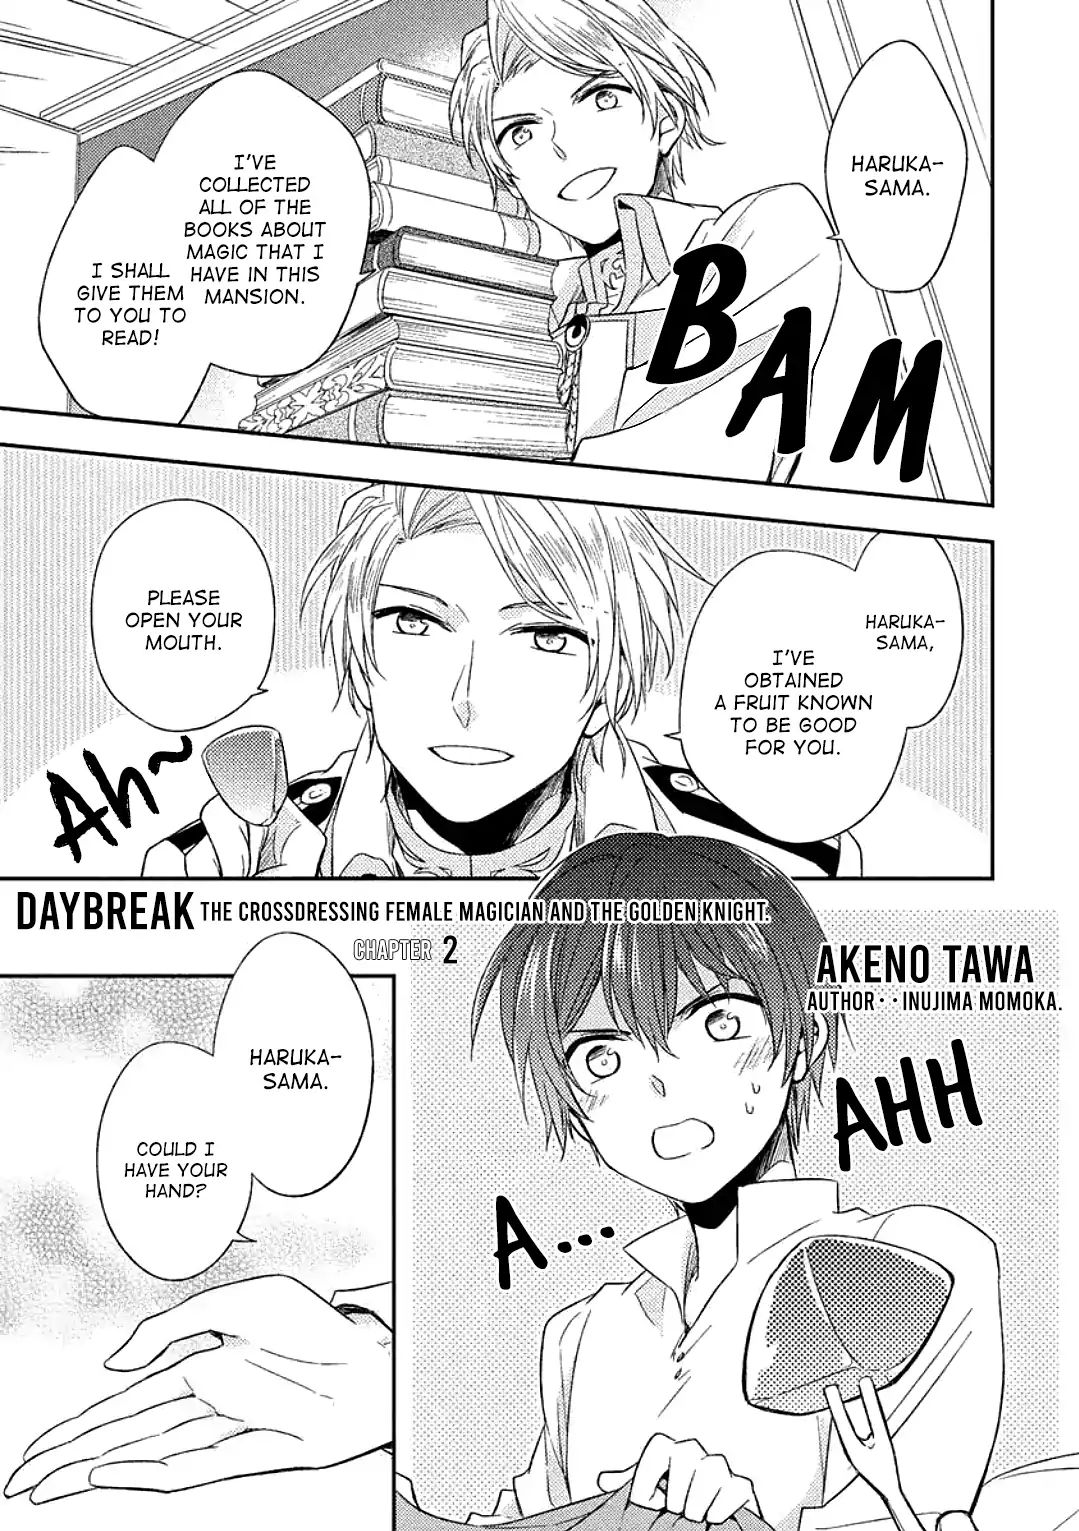 Daybreak: The Crossdressing Female Magician And The Golden Knight - Page 2